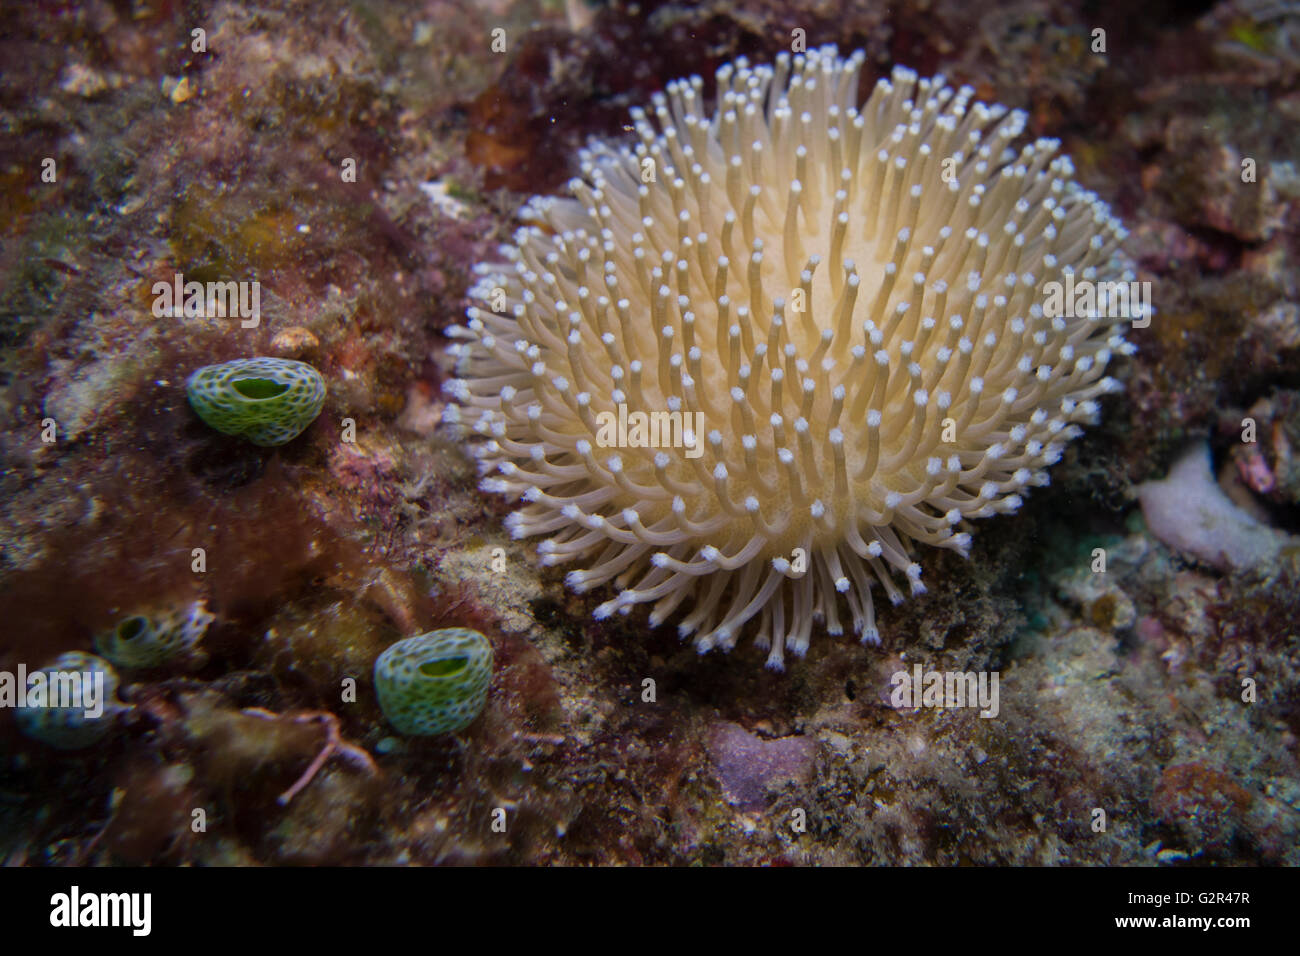 Long polyp leather coral, Sarcophyton sp., from the Coral Triangle, Brunei Darussalam, South China Sea. Stock Photo